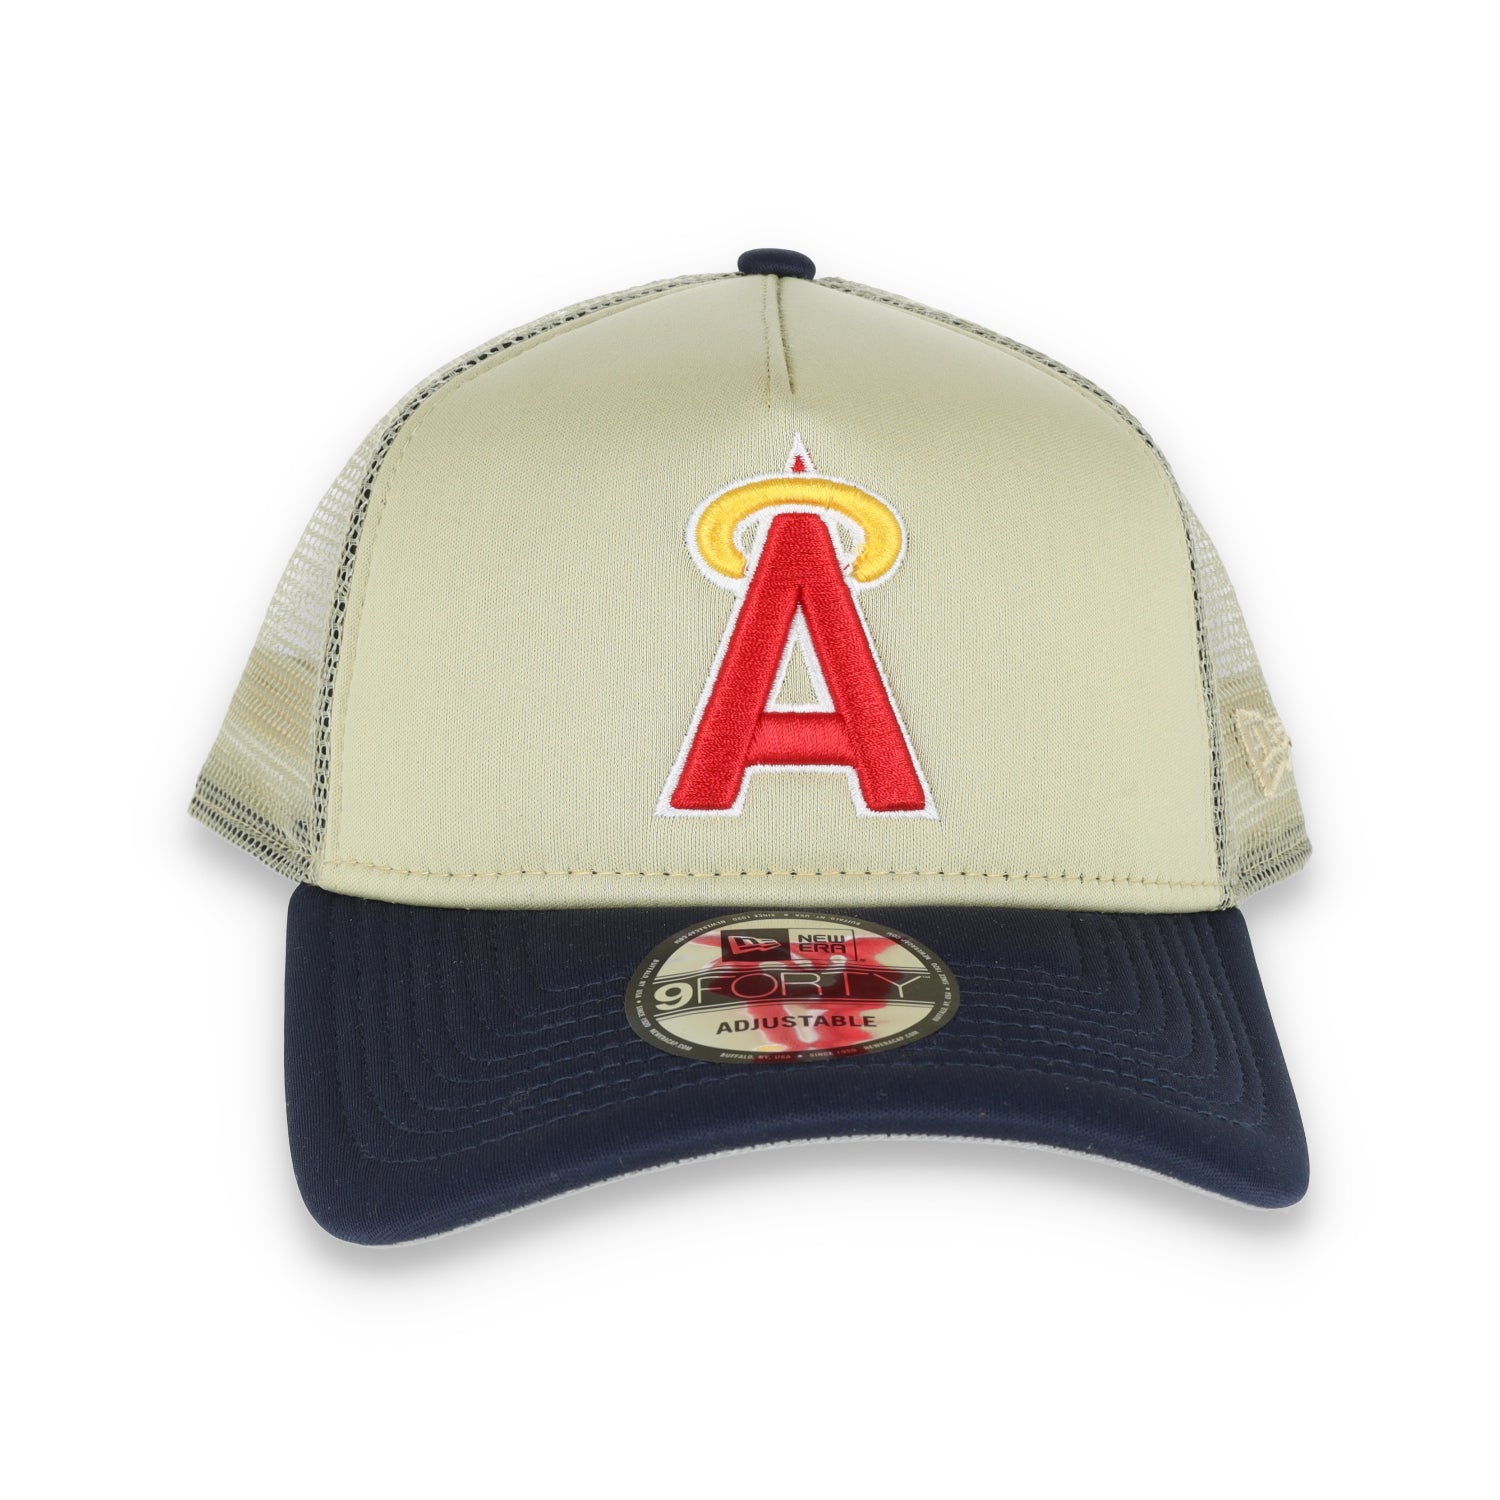 New Era Los Angeles Angels All Day 9Forty A-Frame Trucker-Tan/Navy